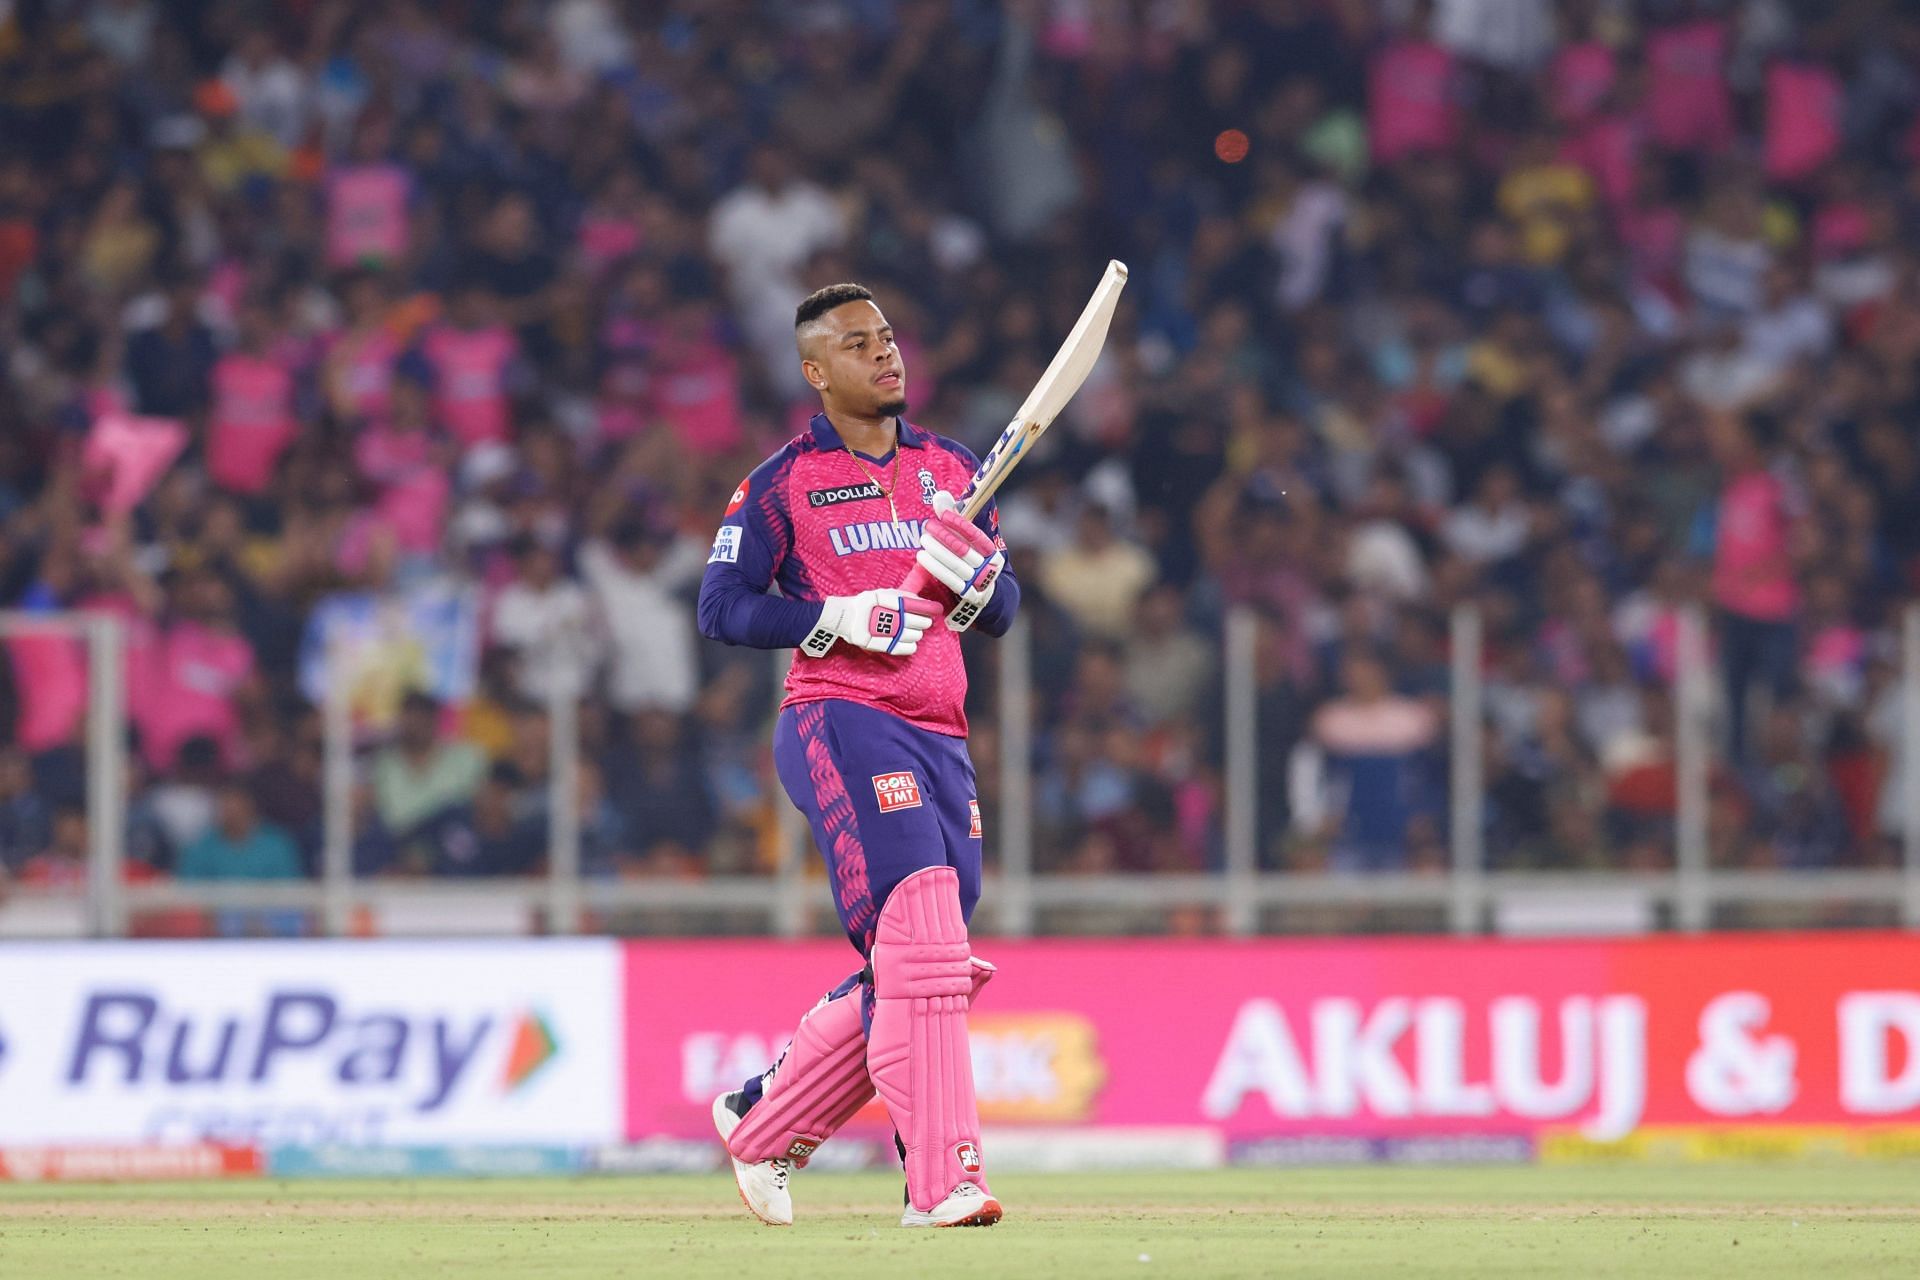 Shimron Hetmyer has sparkled for Rajasthan Royals